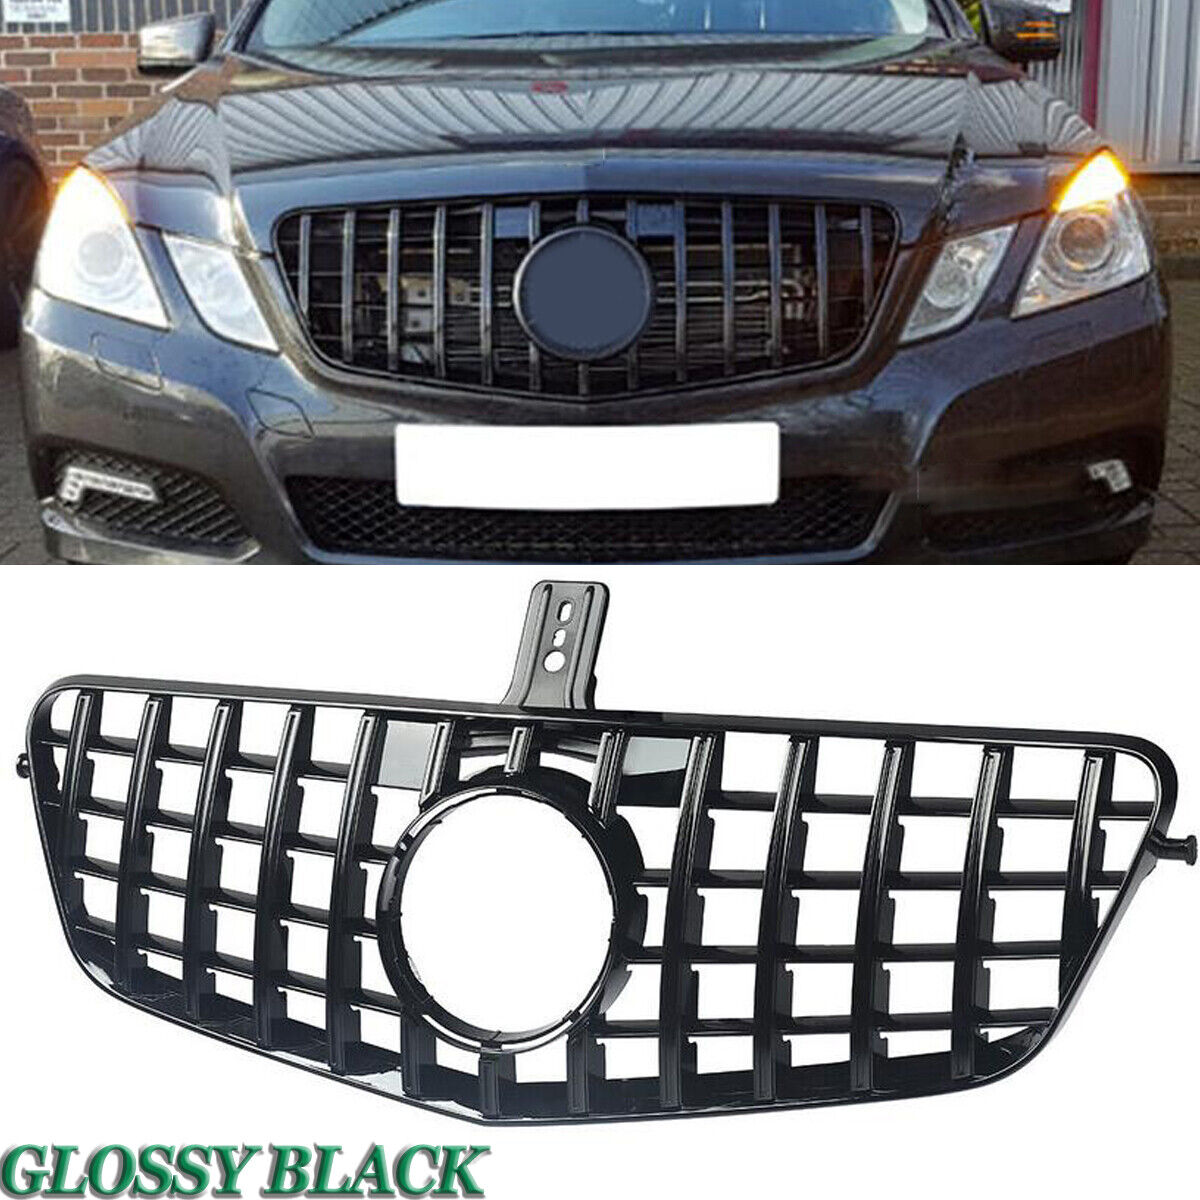 GT R Style Front Grille For Mercedes Benz W212 E-CLASS Gloss Black 2009-2013